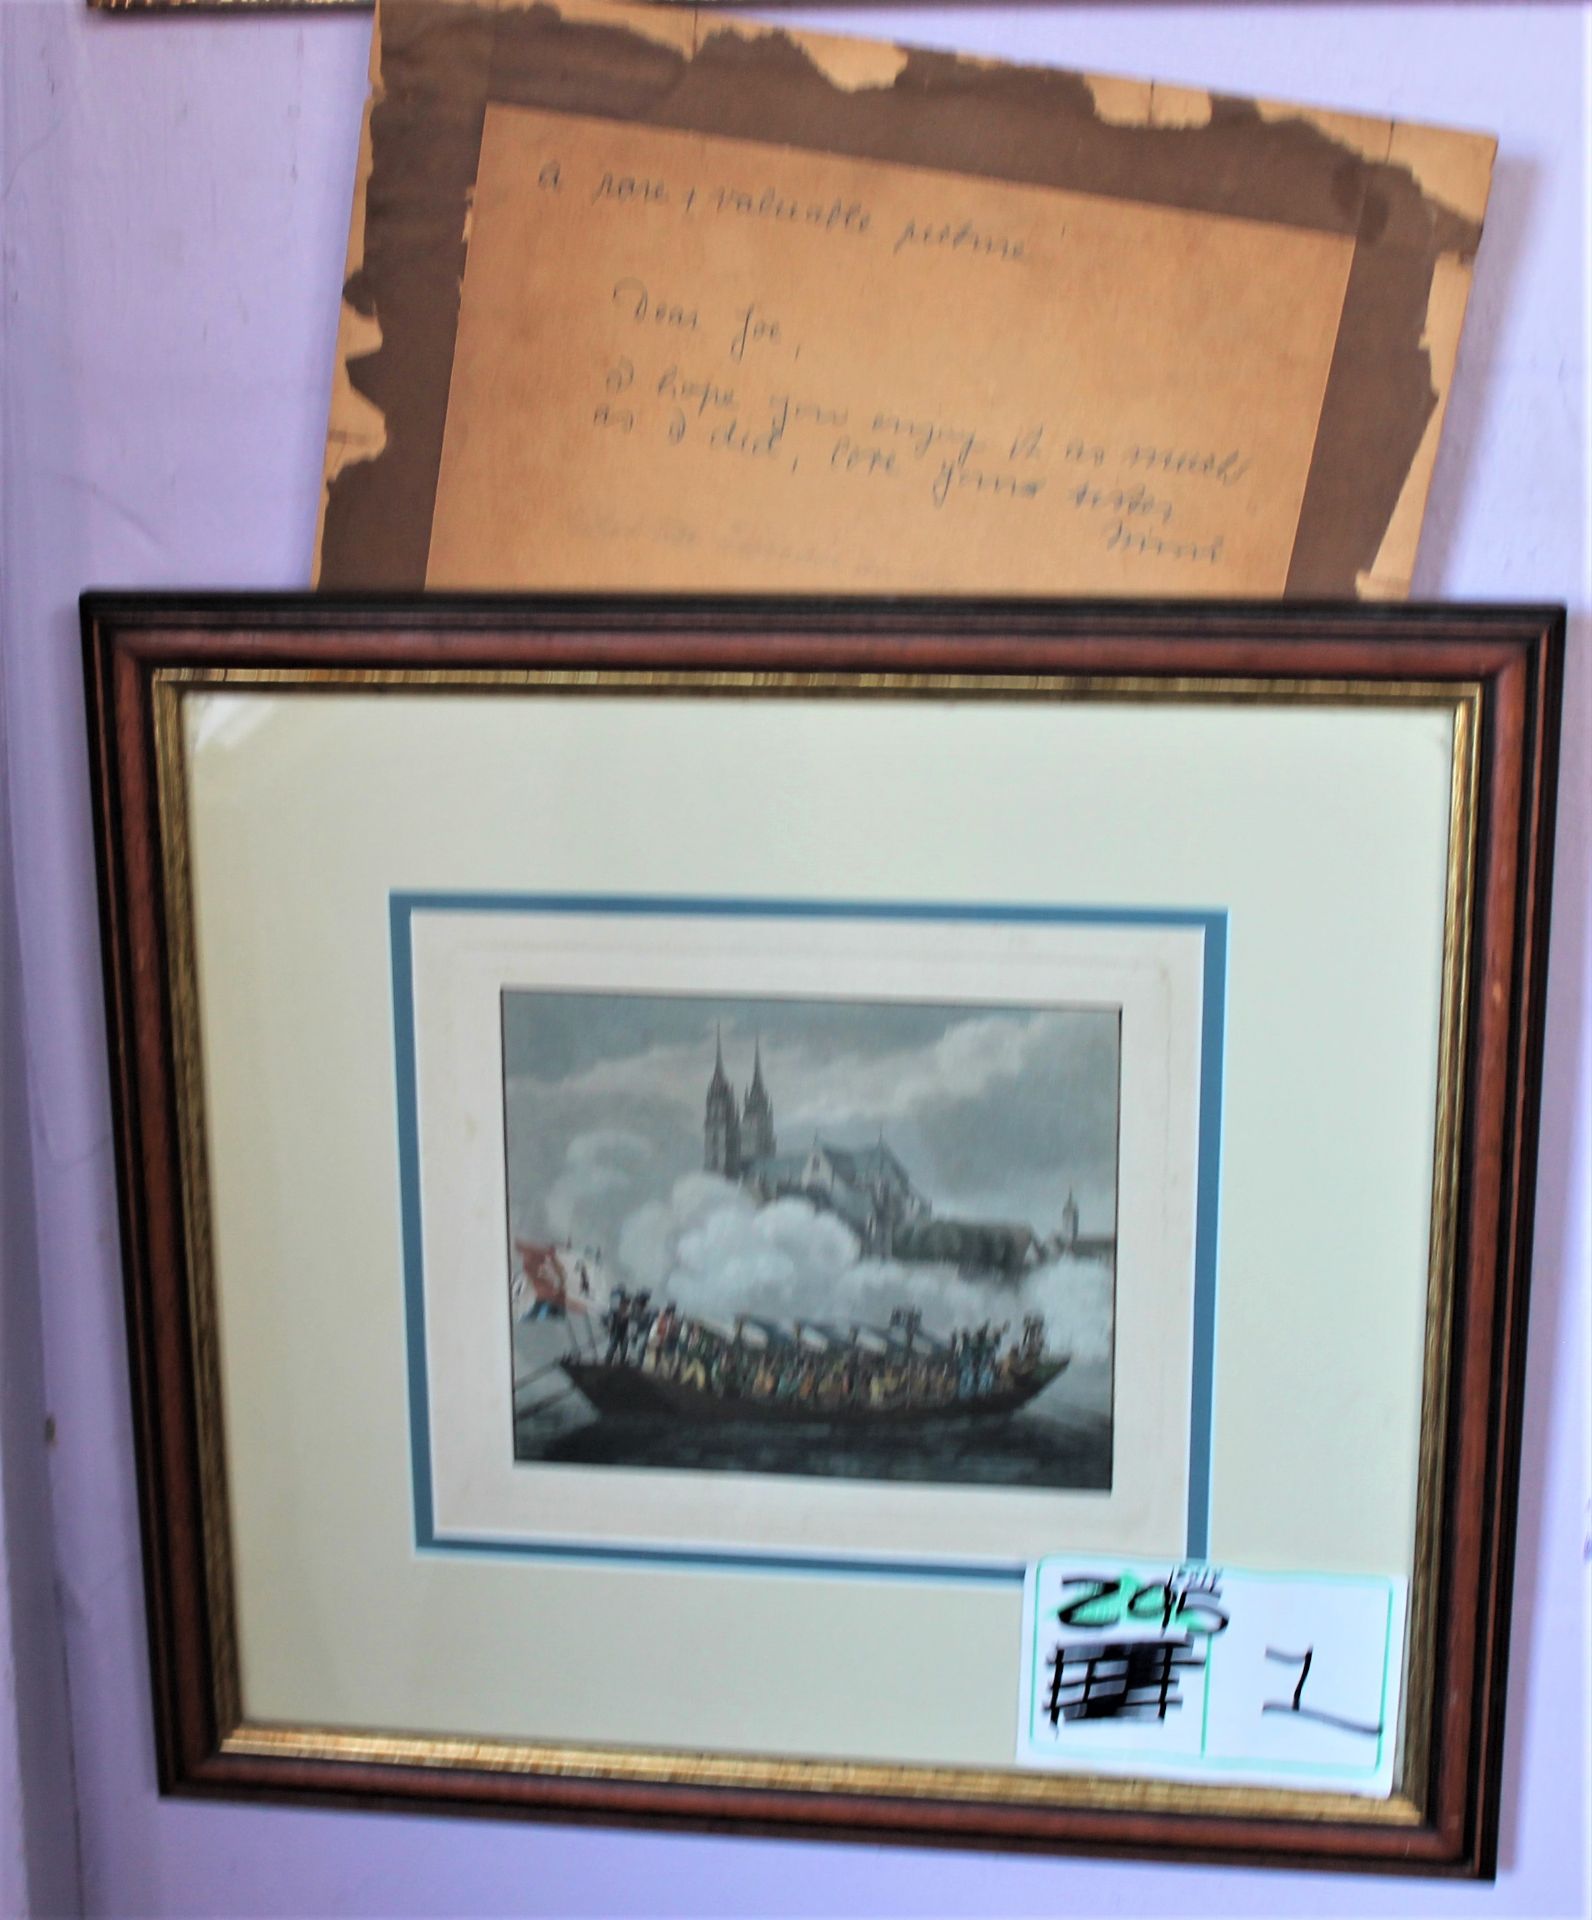 "CELEBRATING FRENCH VICTORY" PRINT W LETTER OF DEDICATION